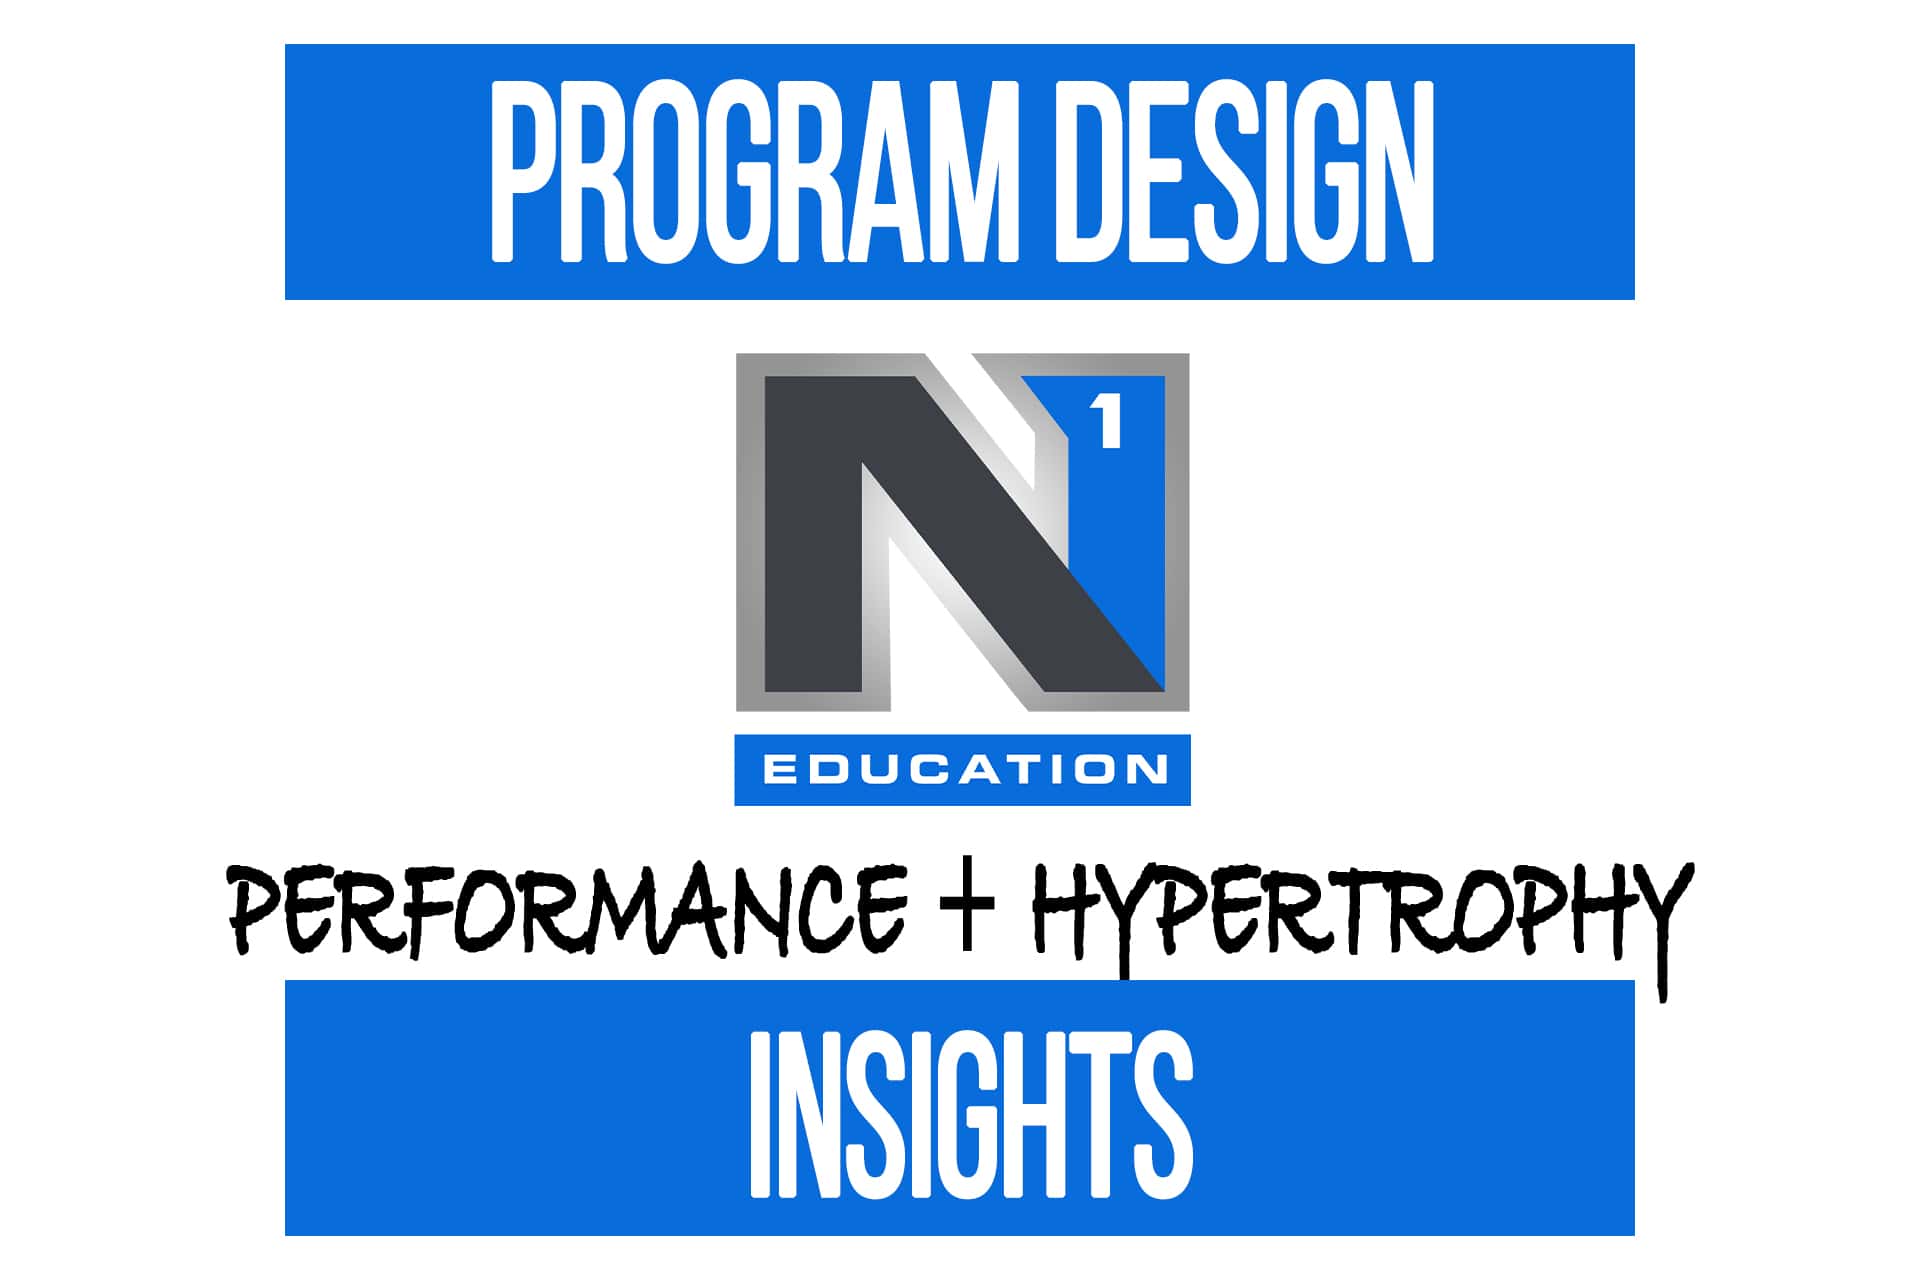 Programming for Performance + Hypertrophy